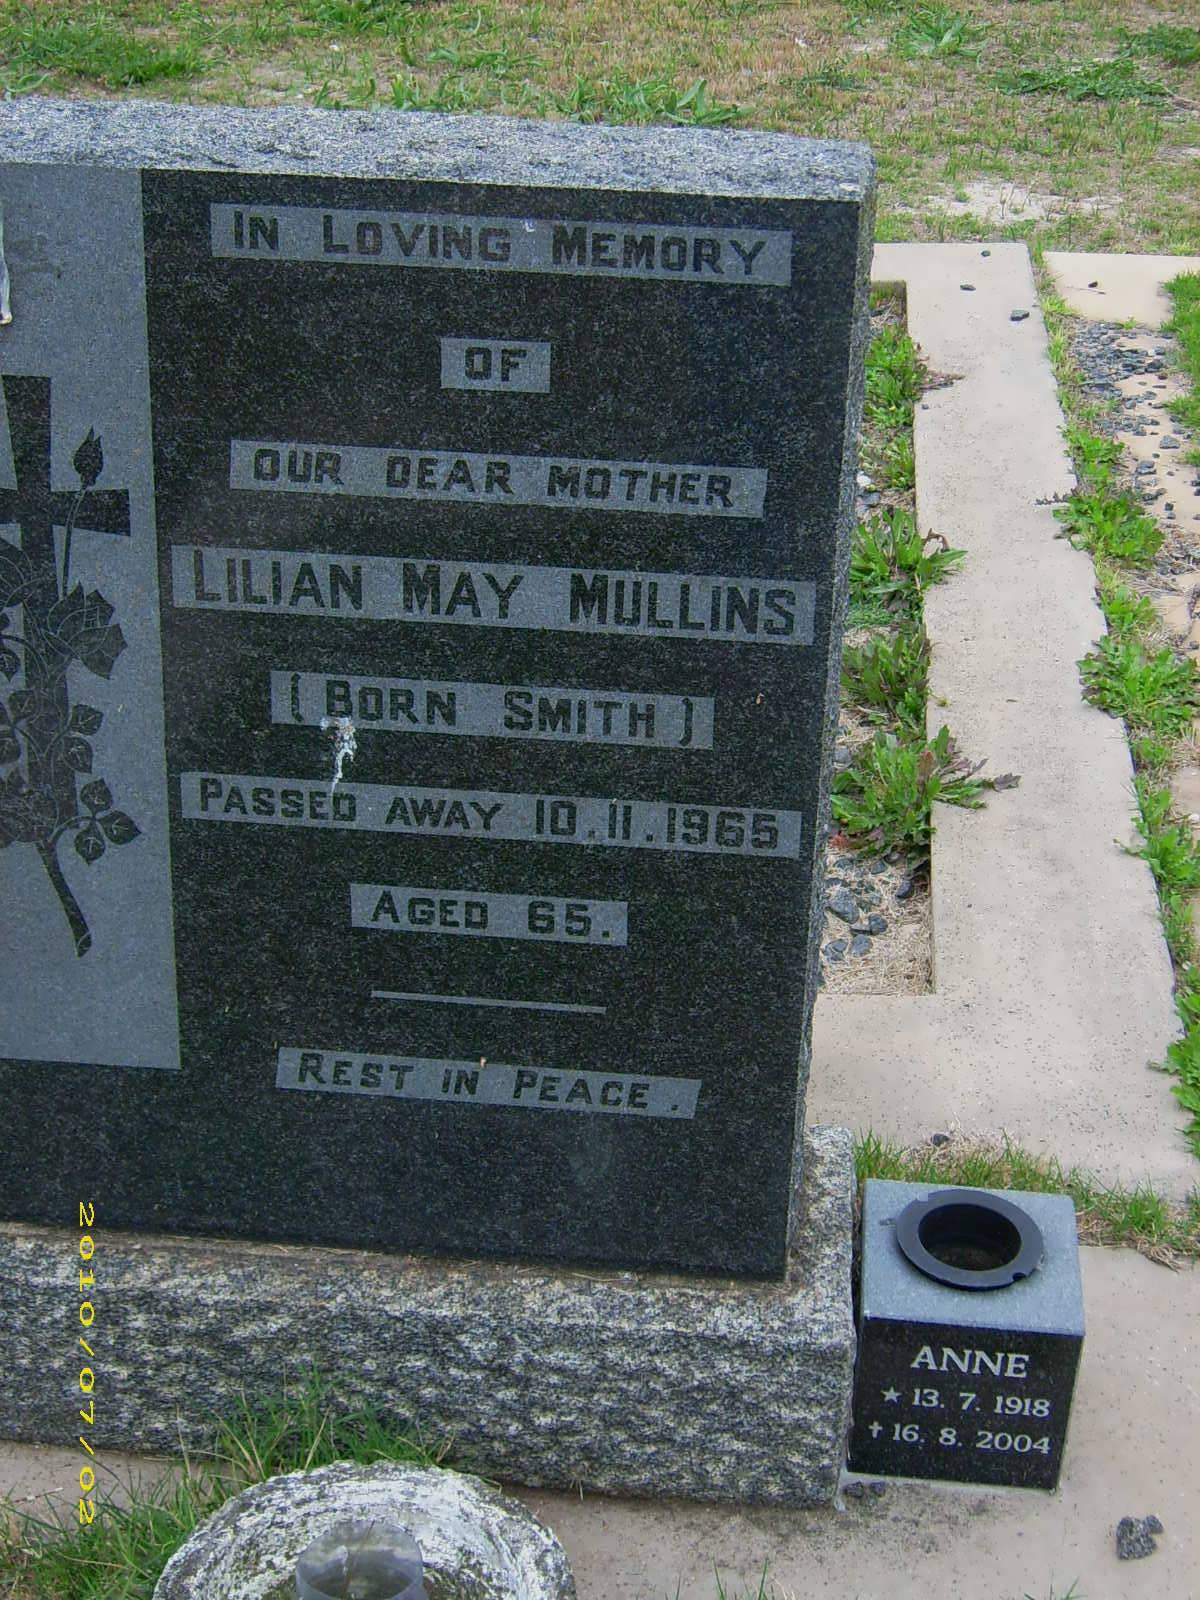 MULLINS Lillian May nee SMITH -1965 :: MULLINS Anne 1918-2004